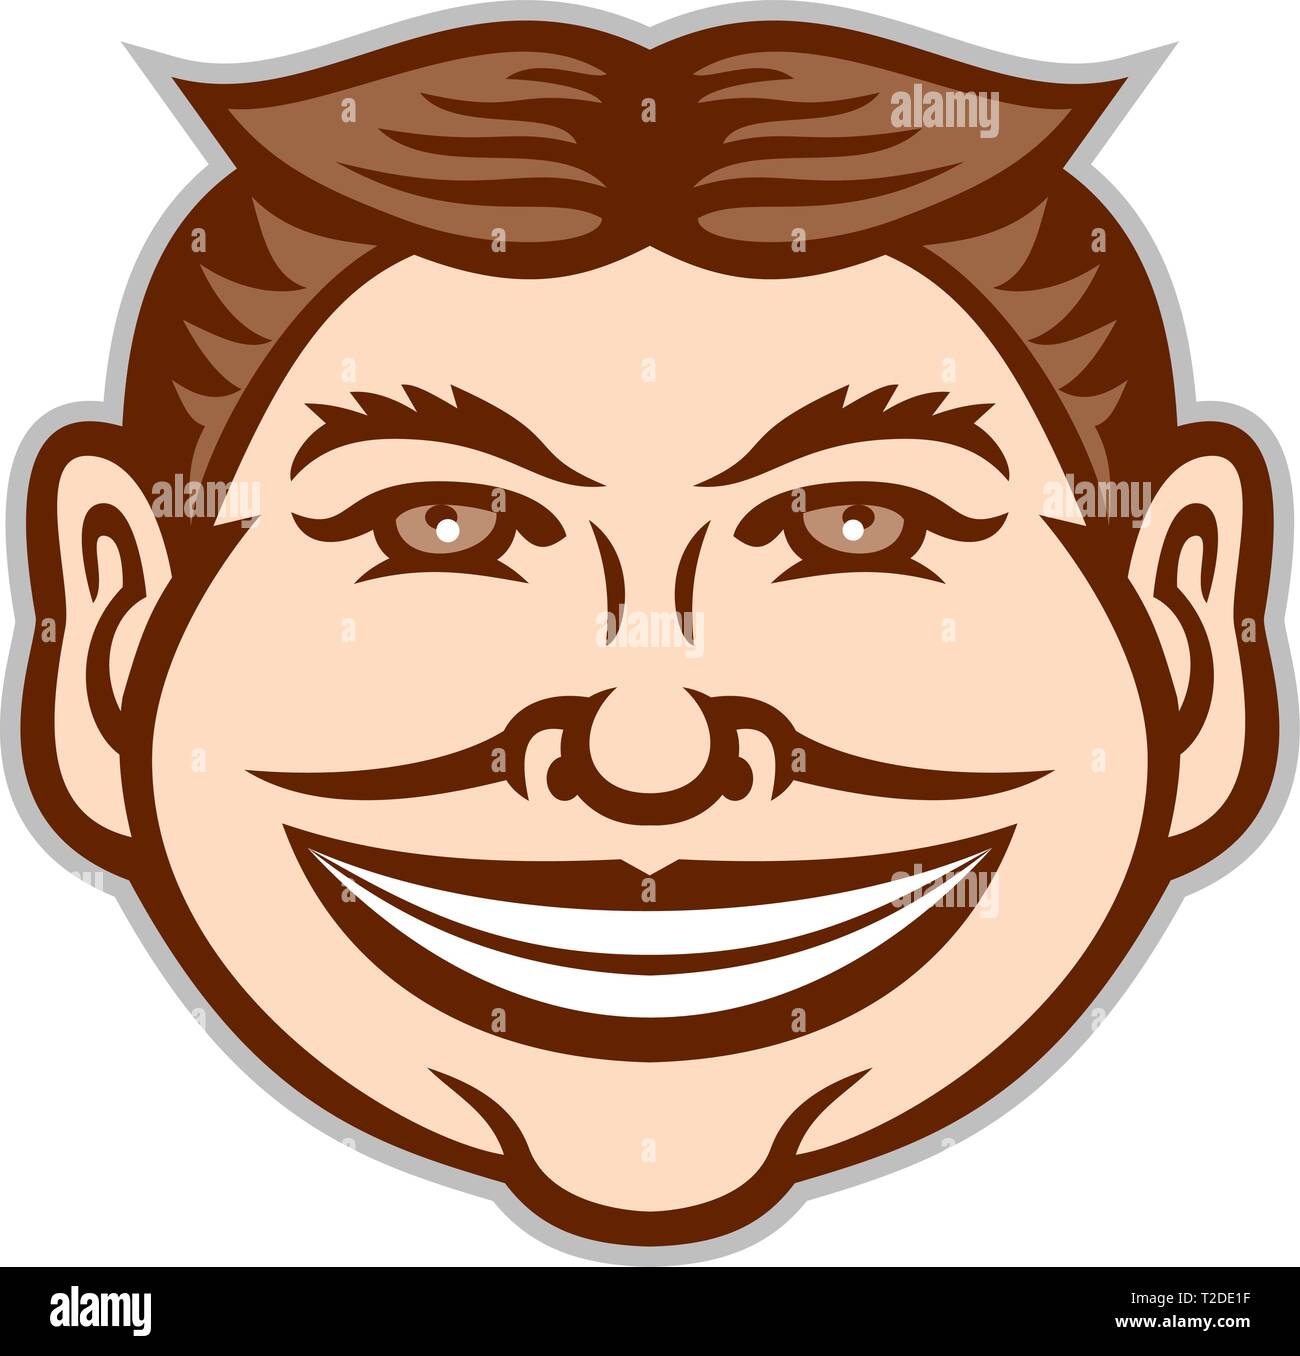 Mascot icon illustration of head of a funny face grinning, leering, smiling slyly beaming mug with hair parted in middle viewed from front on isolated Stock Vector